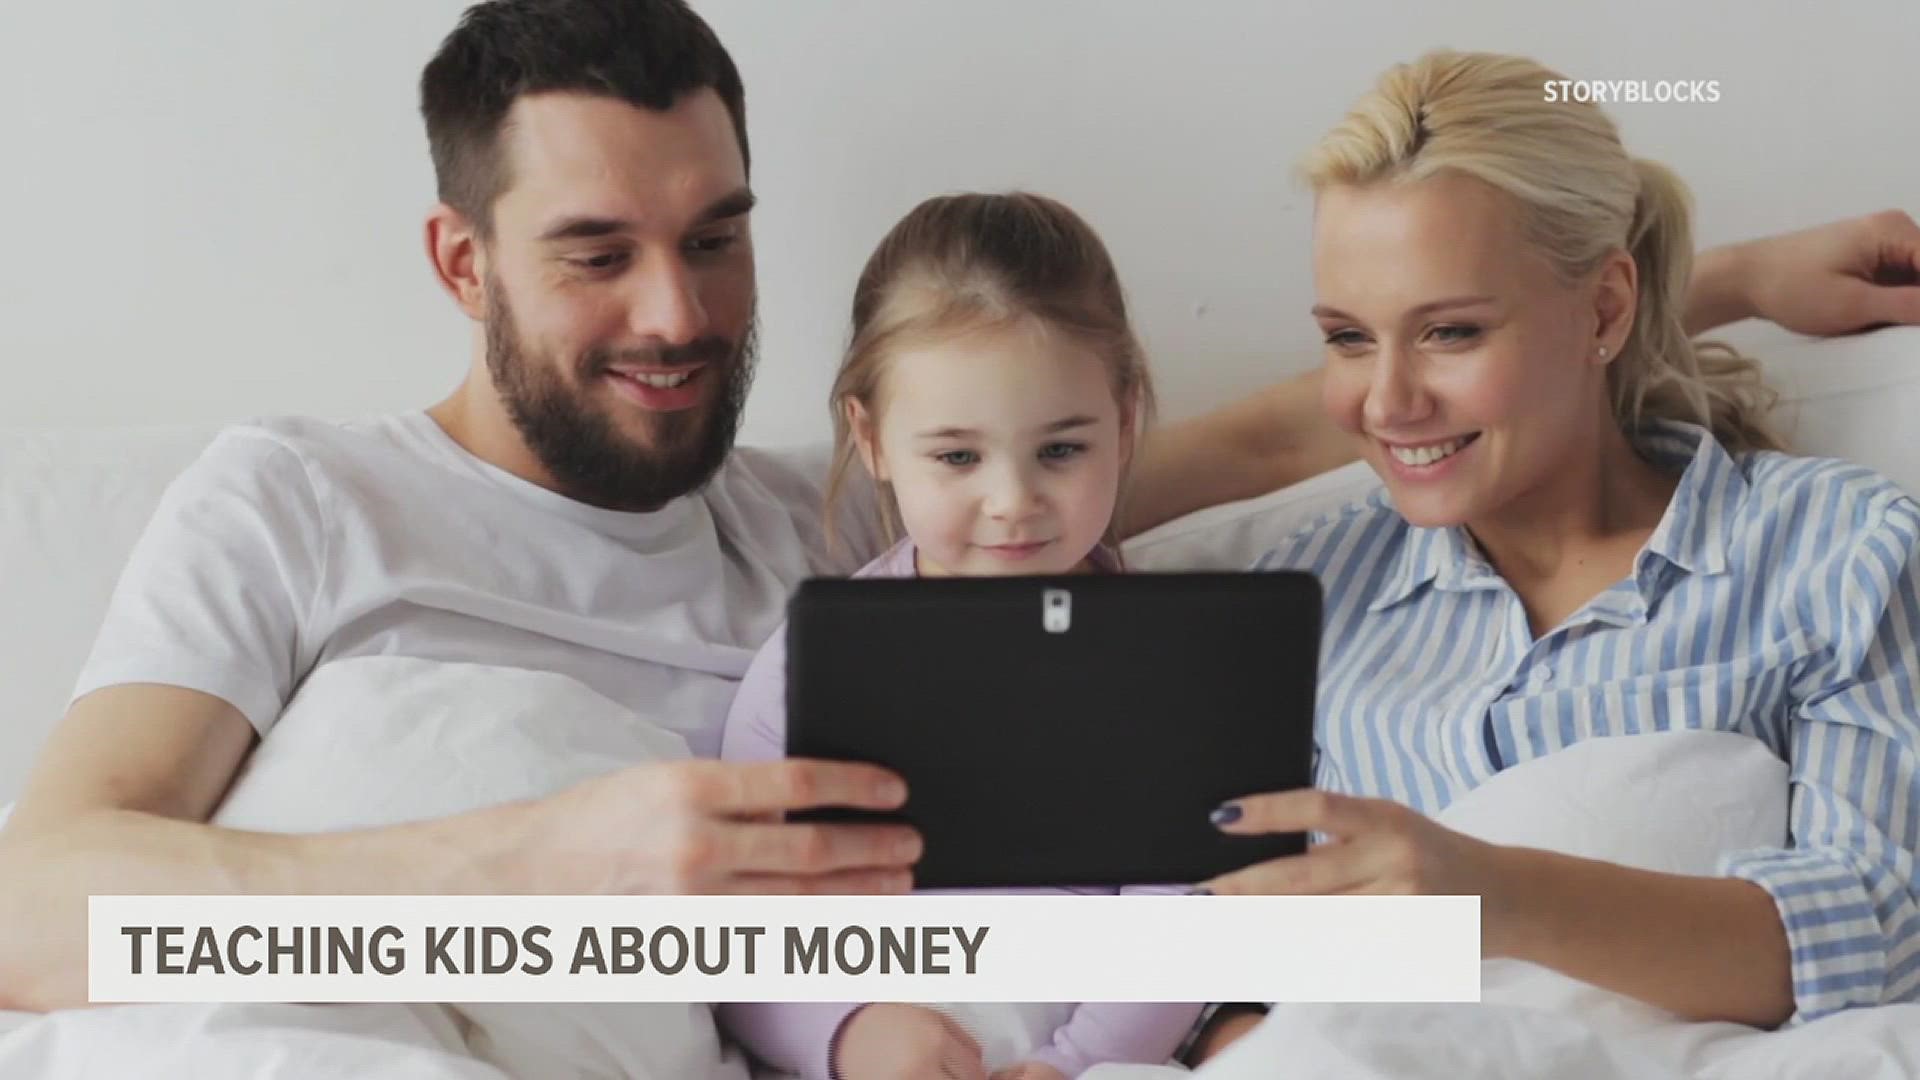 Experts say it's important to teach kids how to earn, spend, save, and invest money